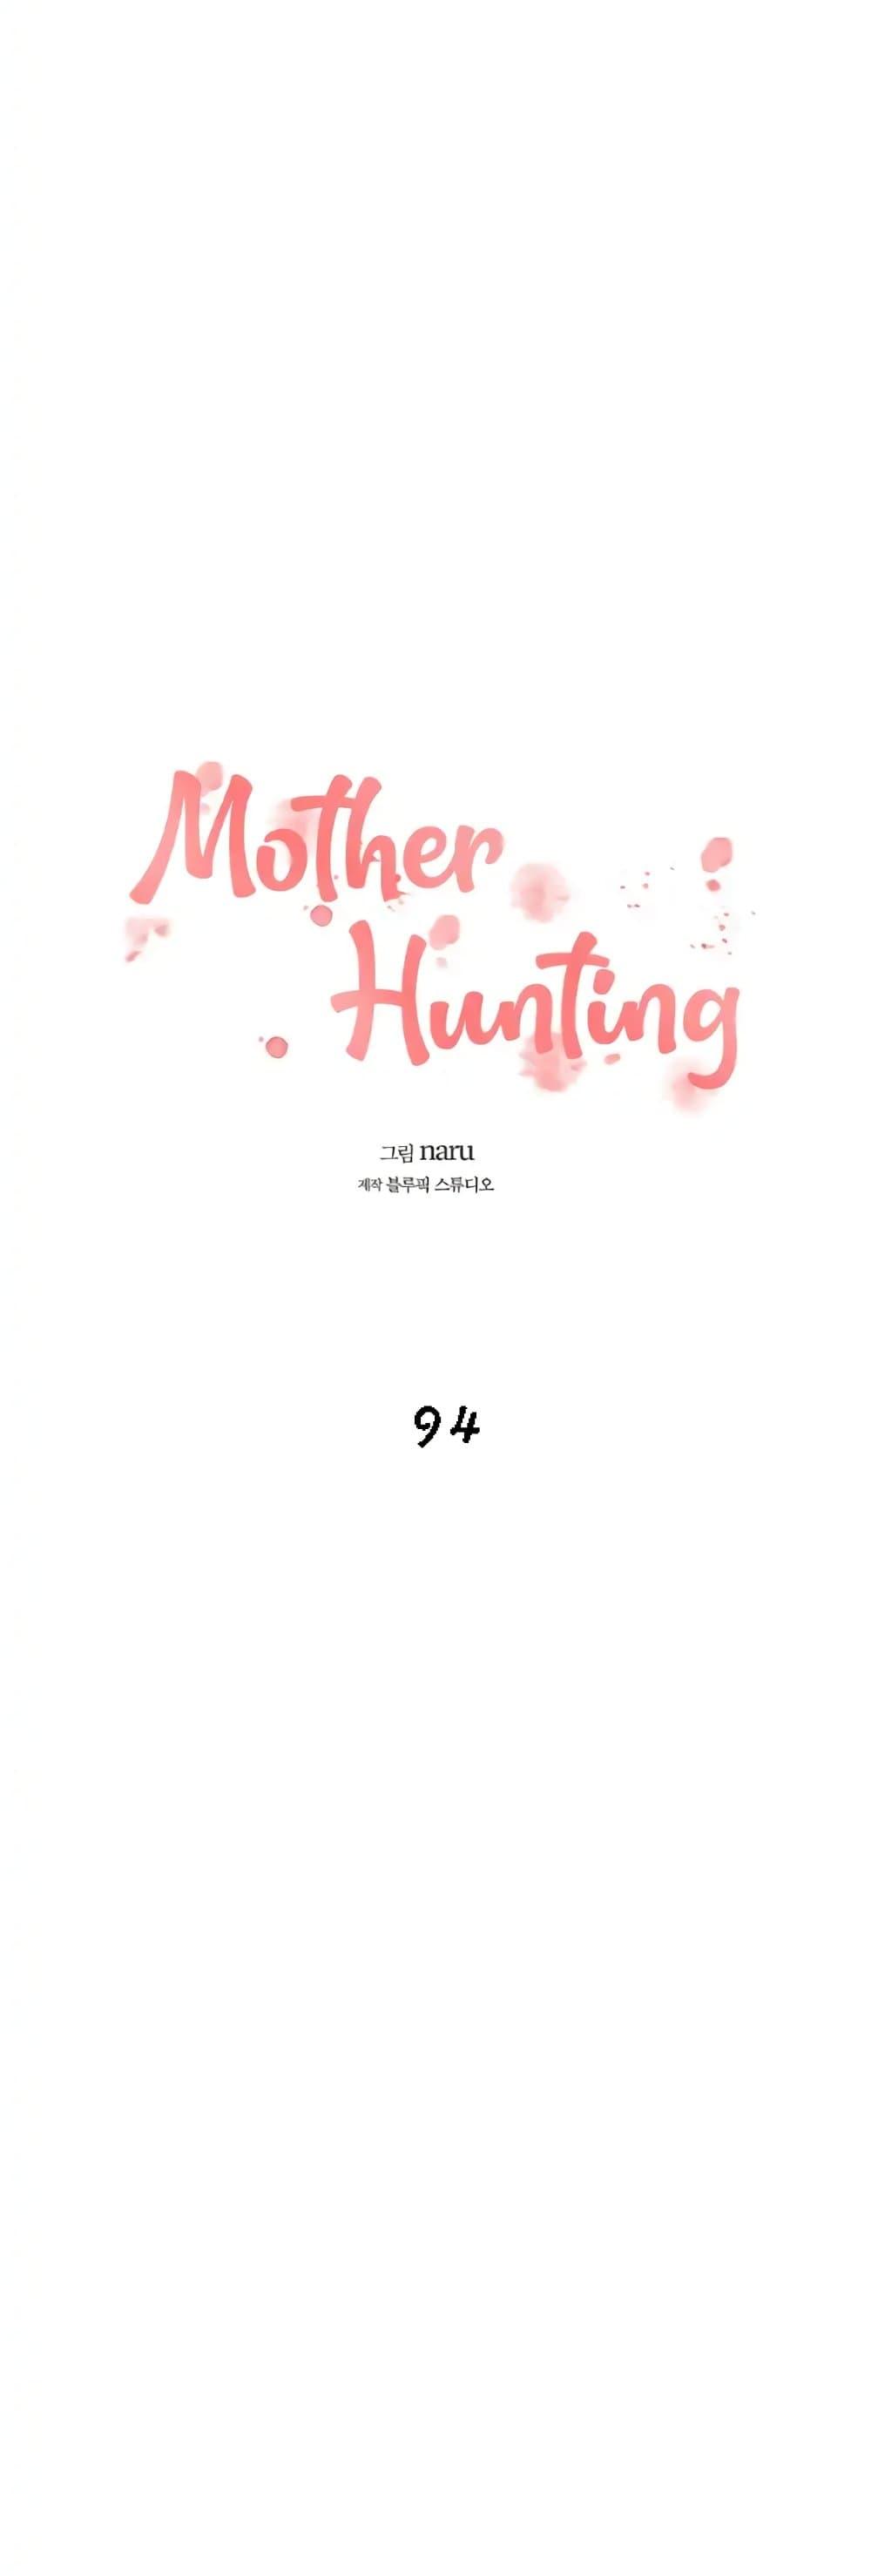 Mother Hunting 94 01